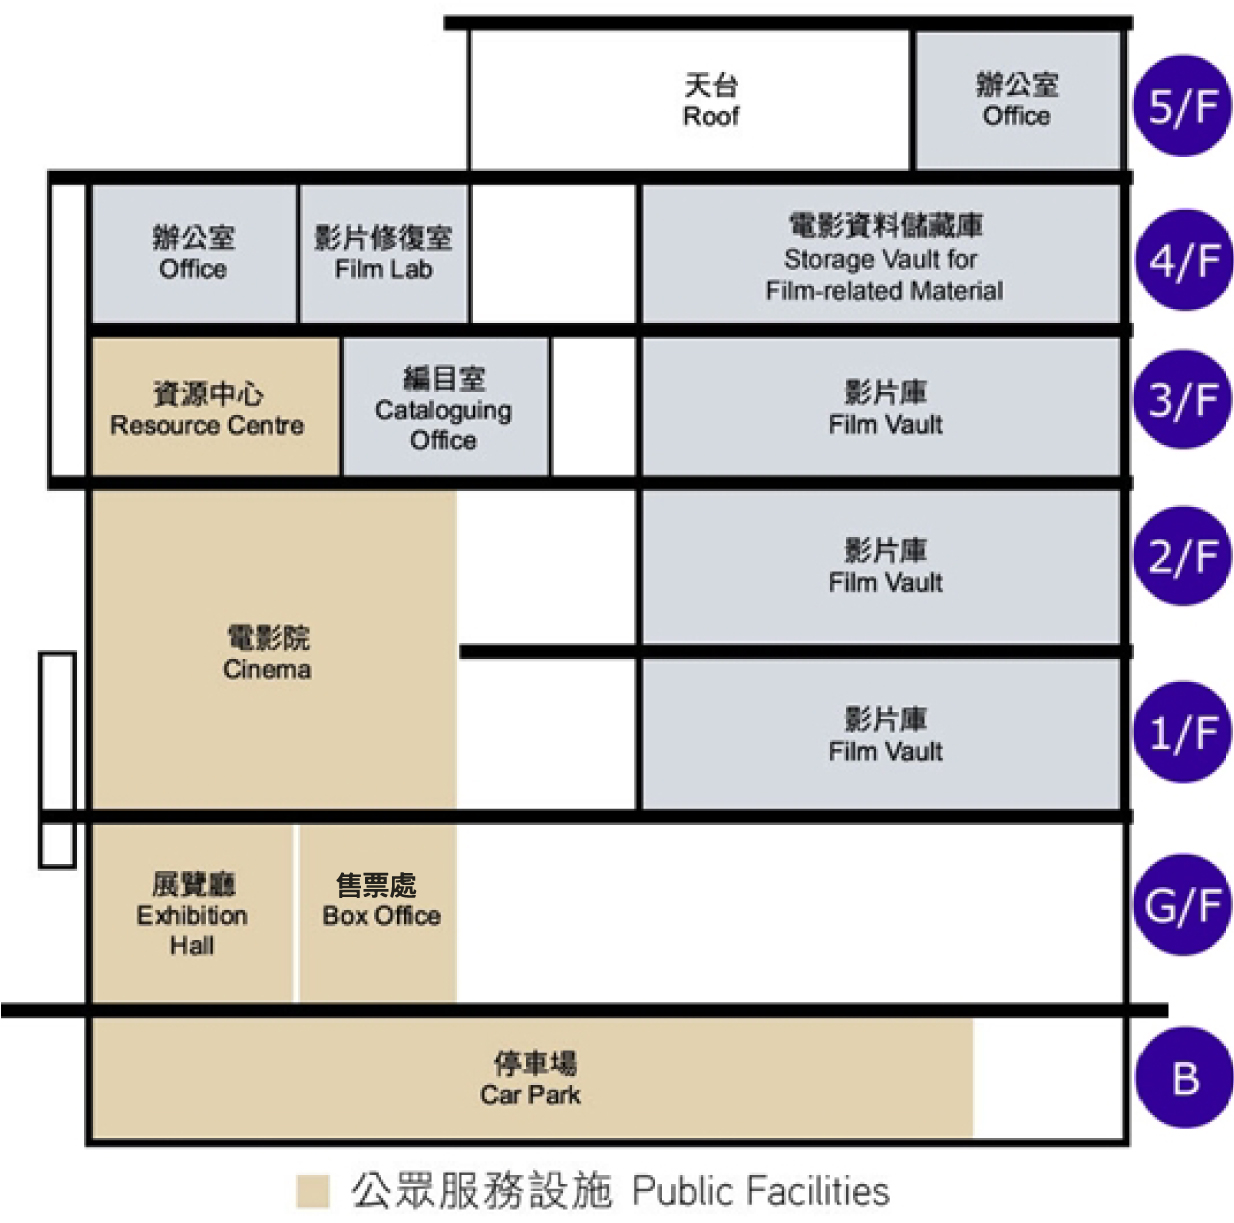 Hong Kong Film Archive Layout Basement: Car Park (Public Facilities) Ground Floor: Exhibition Hall and Box Office (both are Public Facilities) First Floor: Cinema (Public Facilities), Film Vault Second Floor: Cinema (Public Facilities), Film Vault Third Floor: Resource Centre (Public Facilities), Cataloguing Office, Film Vault Fourth Floor: Office, Film Lab, Storage Vault for Film-related Material Fiveth Floor: Roof, Office